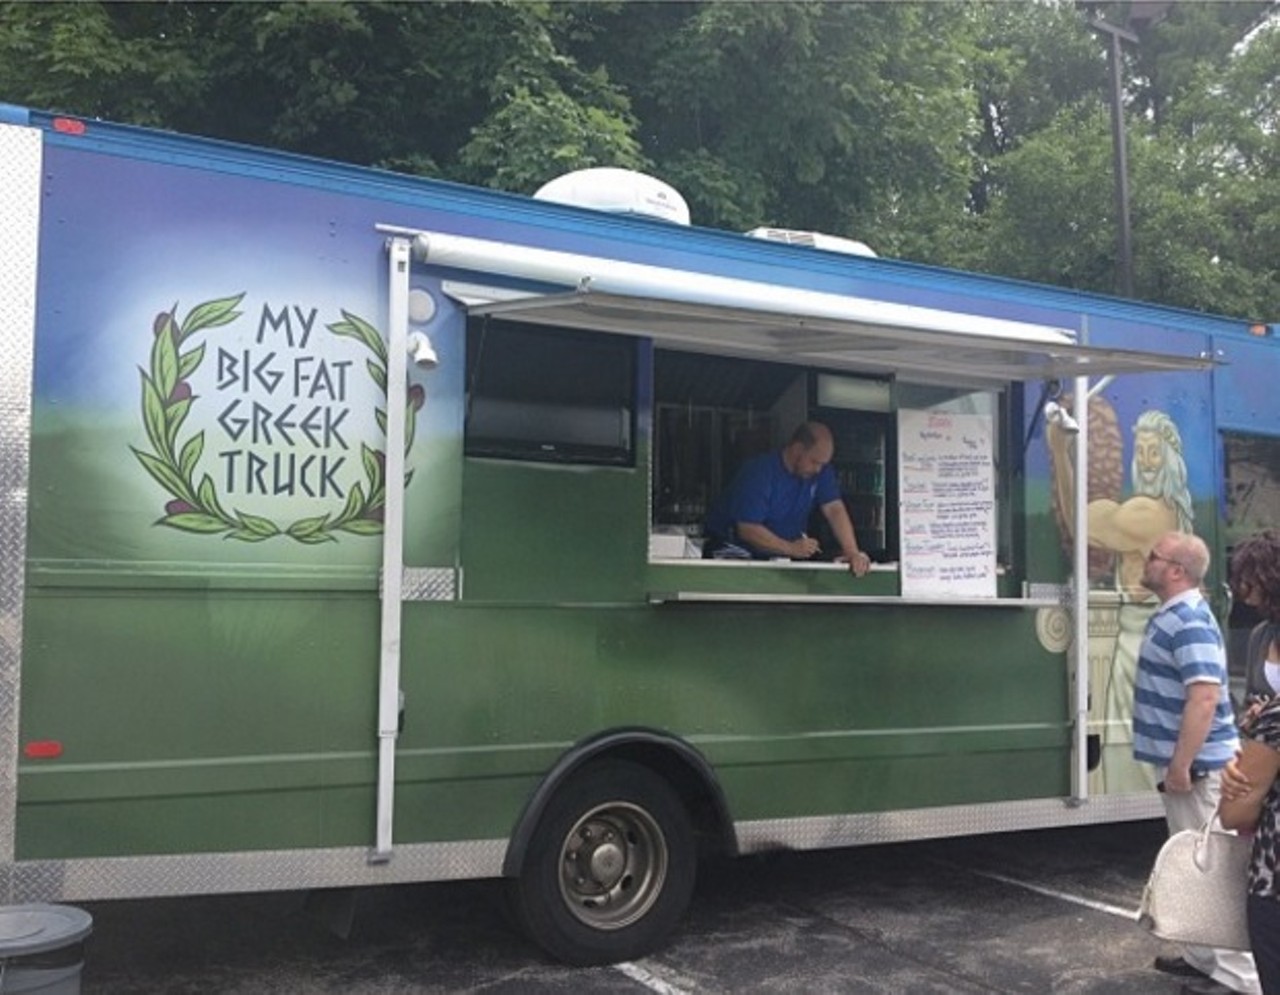 My Big Fat Greek Truck
@GreekTruckSTL
First, how can you not love that name? Second of all, there's no way you won't love this fresh, authentic Greek food. My Big Fat Greek Truck isn't open during the winter months, but it's definitely worth seeking out when spring rolls around. Photo courtesy of Instagram / ishtastic_3.